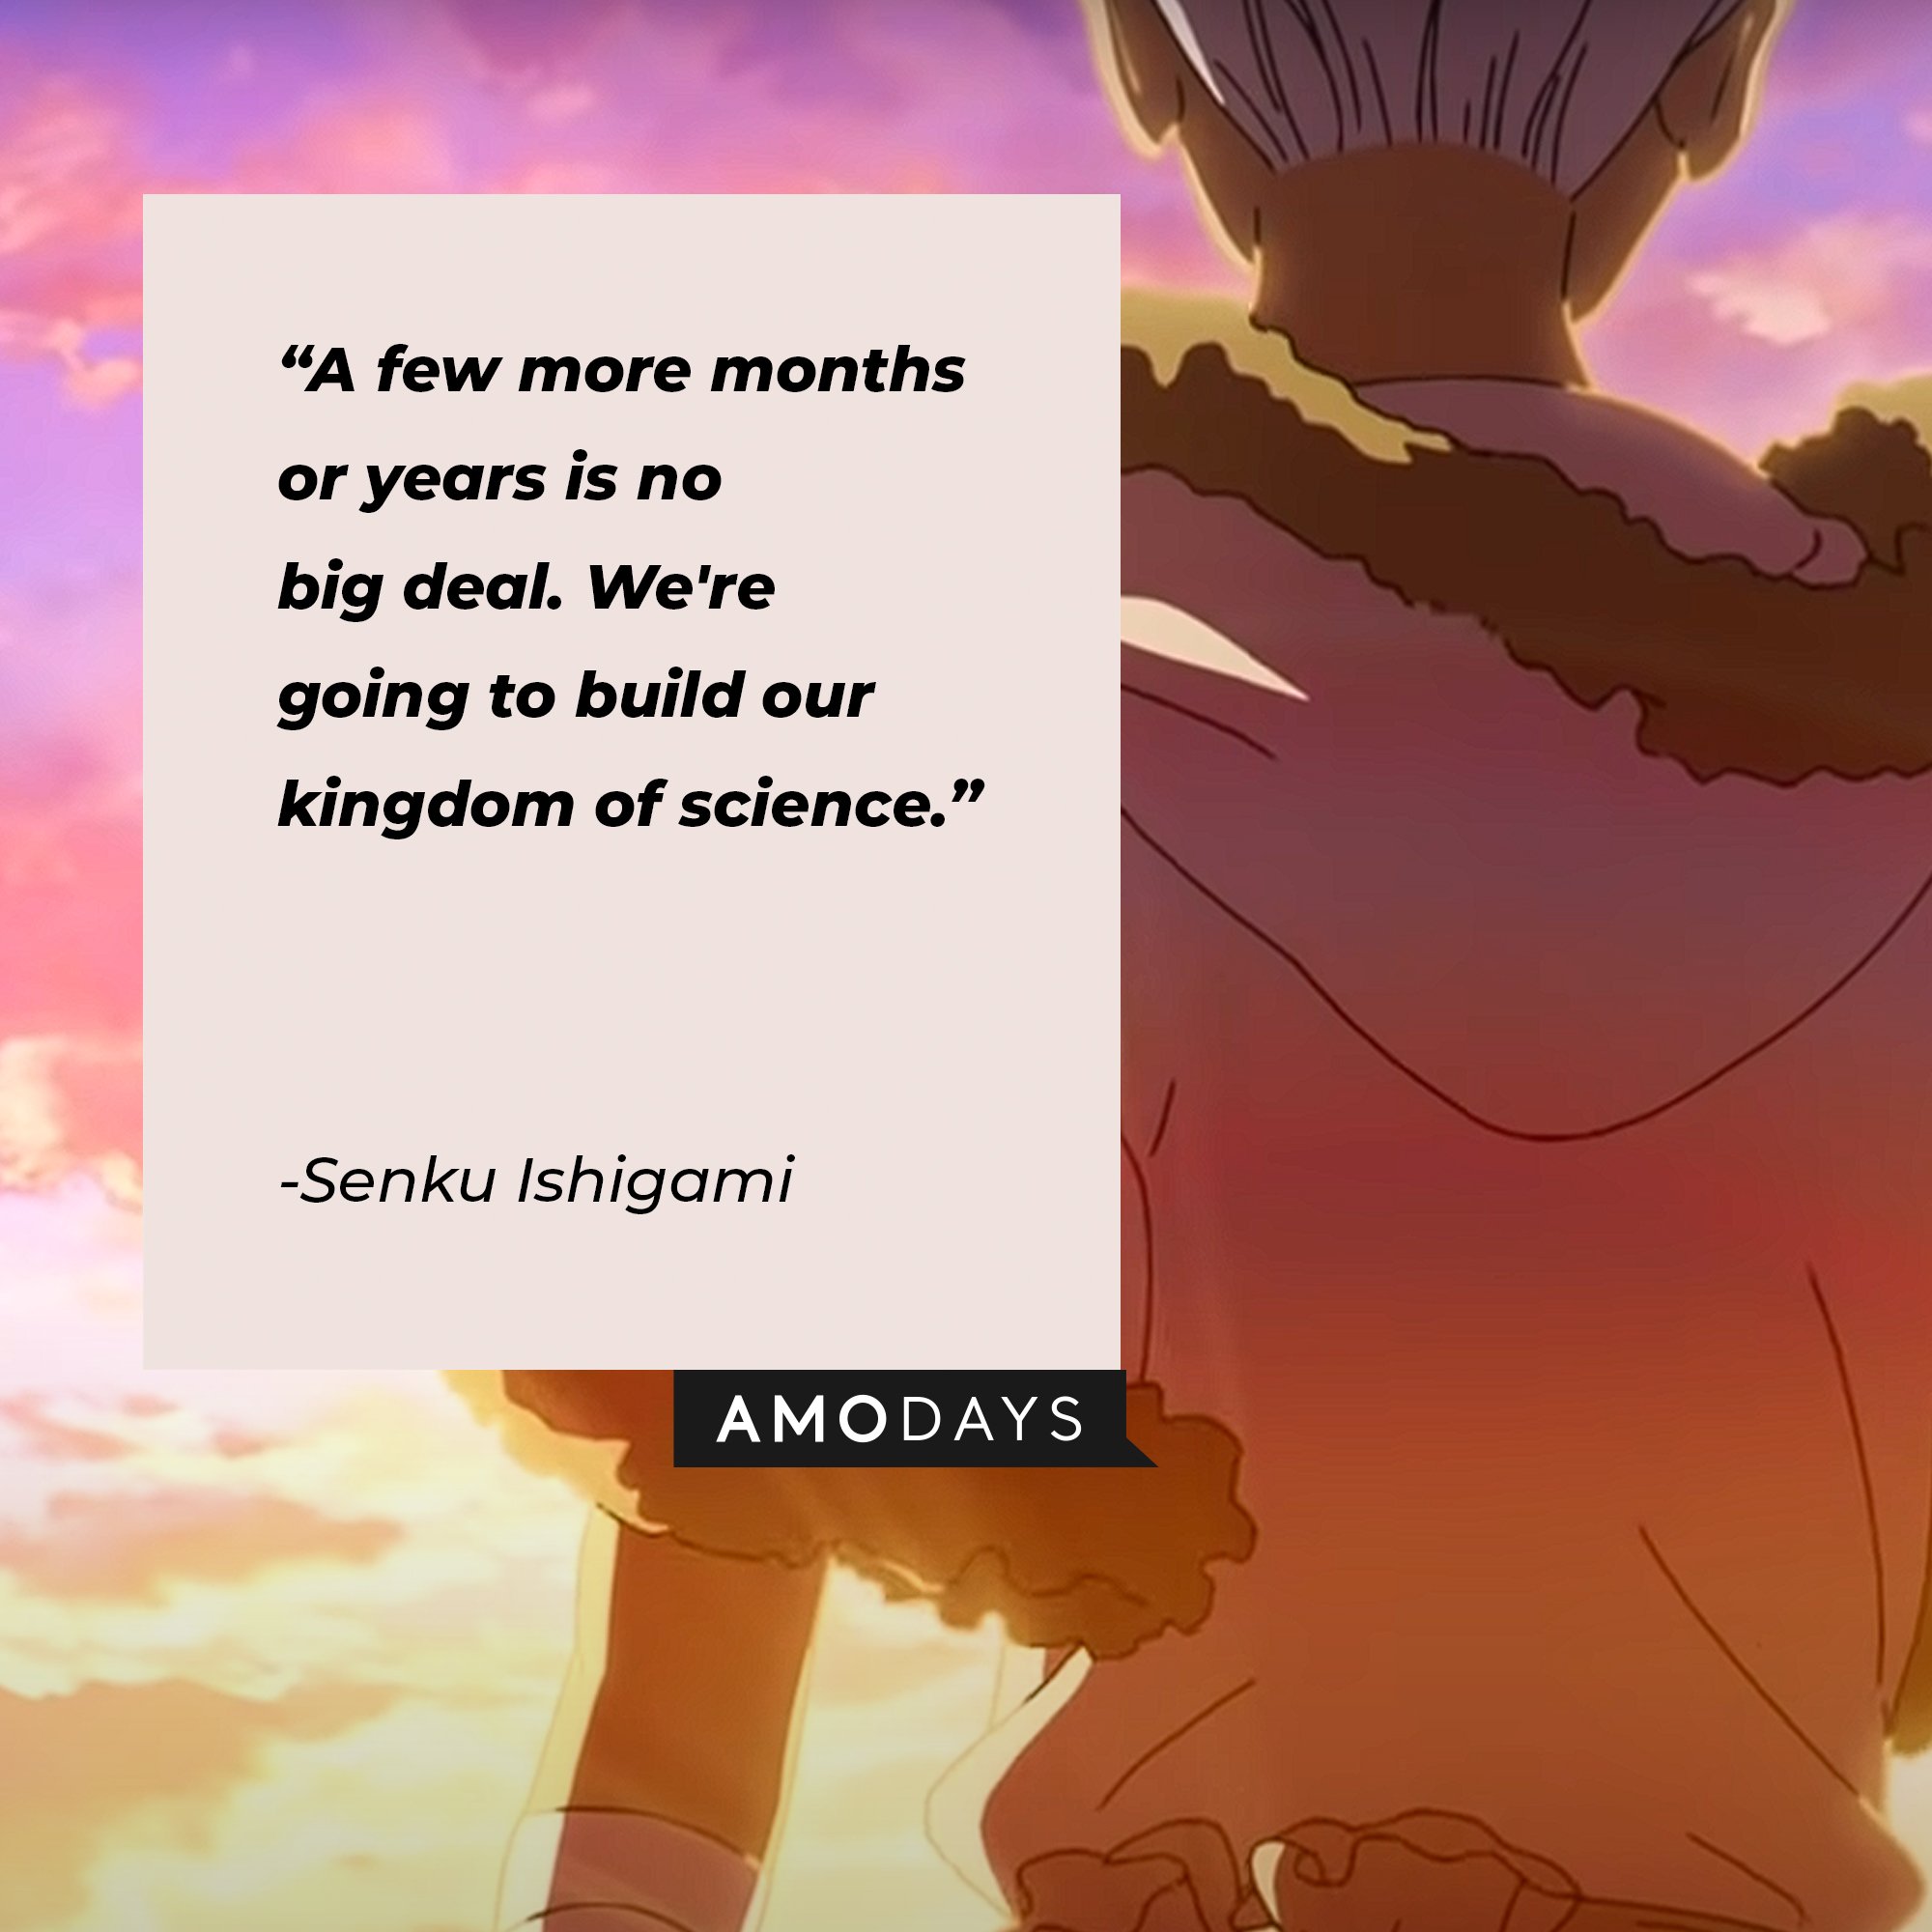 Senku Ishigami’s quote: “A few more months or years is no big deal. we're going to build our kingdom of science." | Image: AmoDays